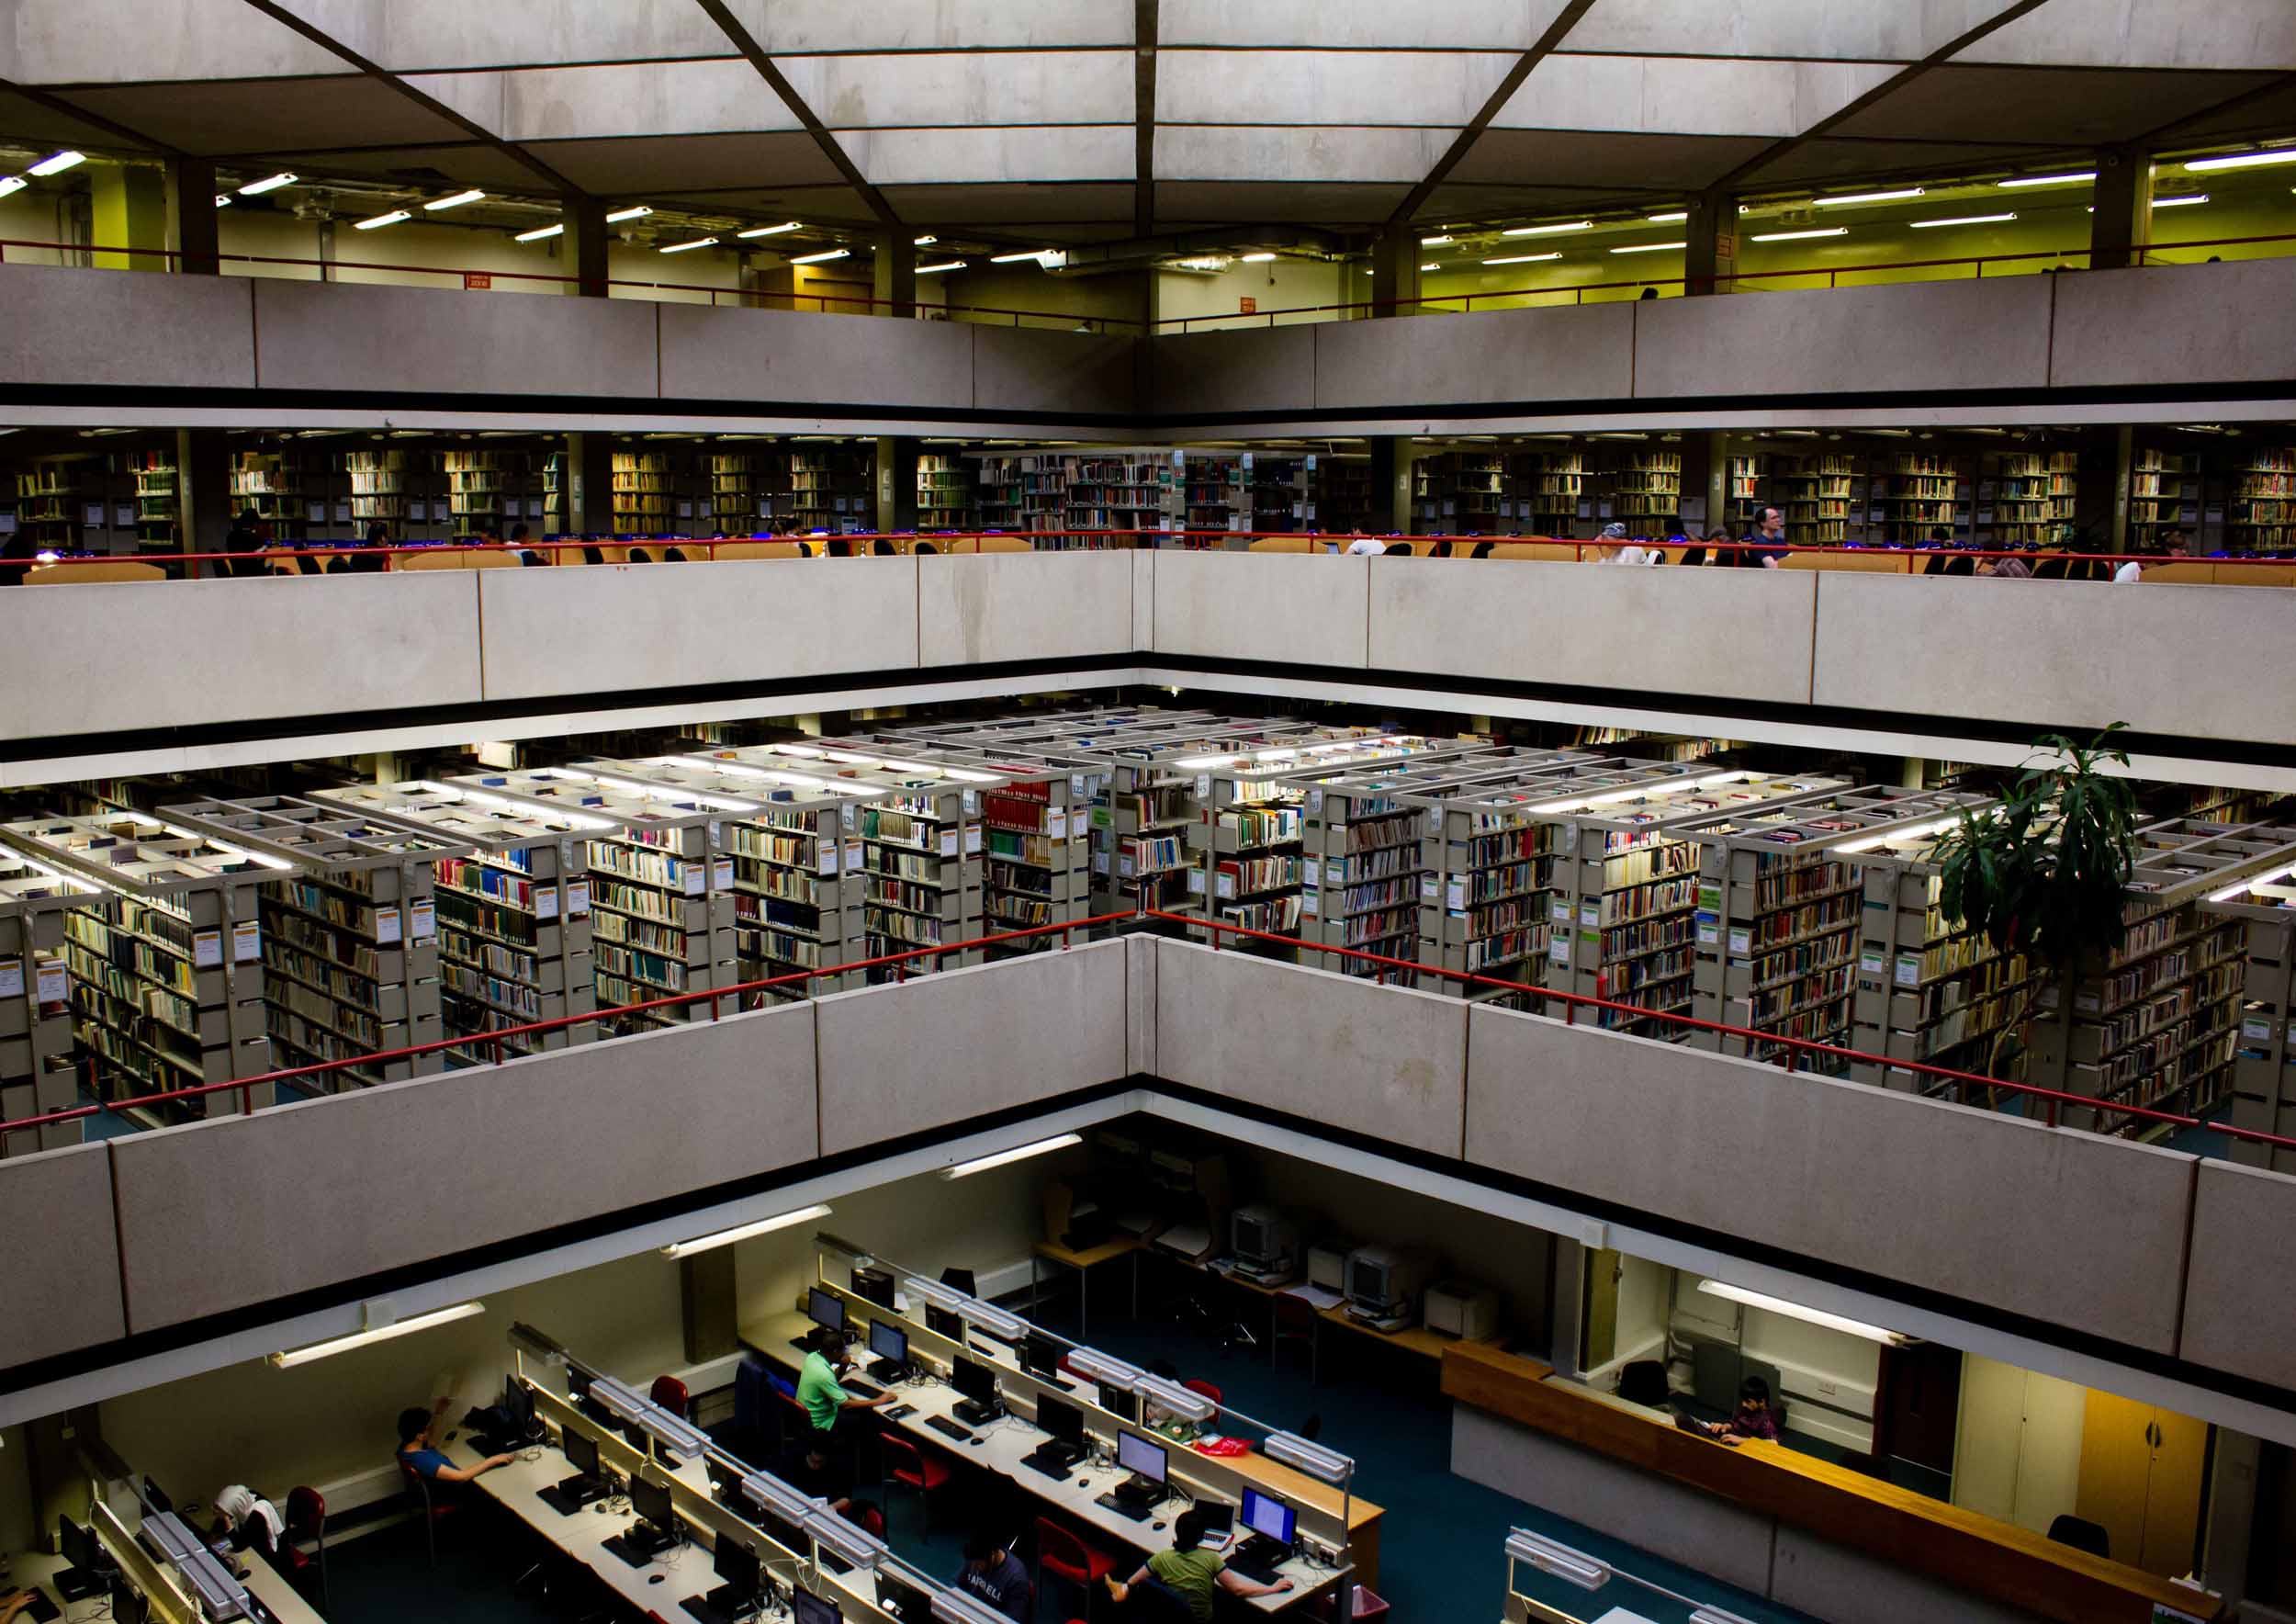 SOAS, University of London library, 2015. Copyright Angela Aliff. Creative Commons Attribution-NonCommercial 3.0 Unported (https://creativecommons.org/licenses/by-nc/3.0/).